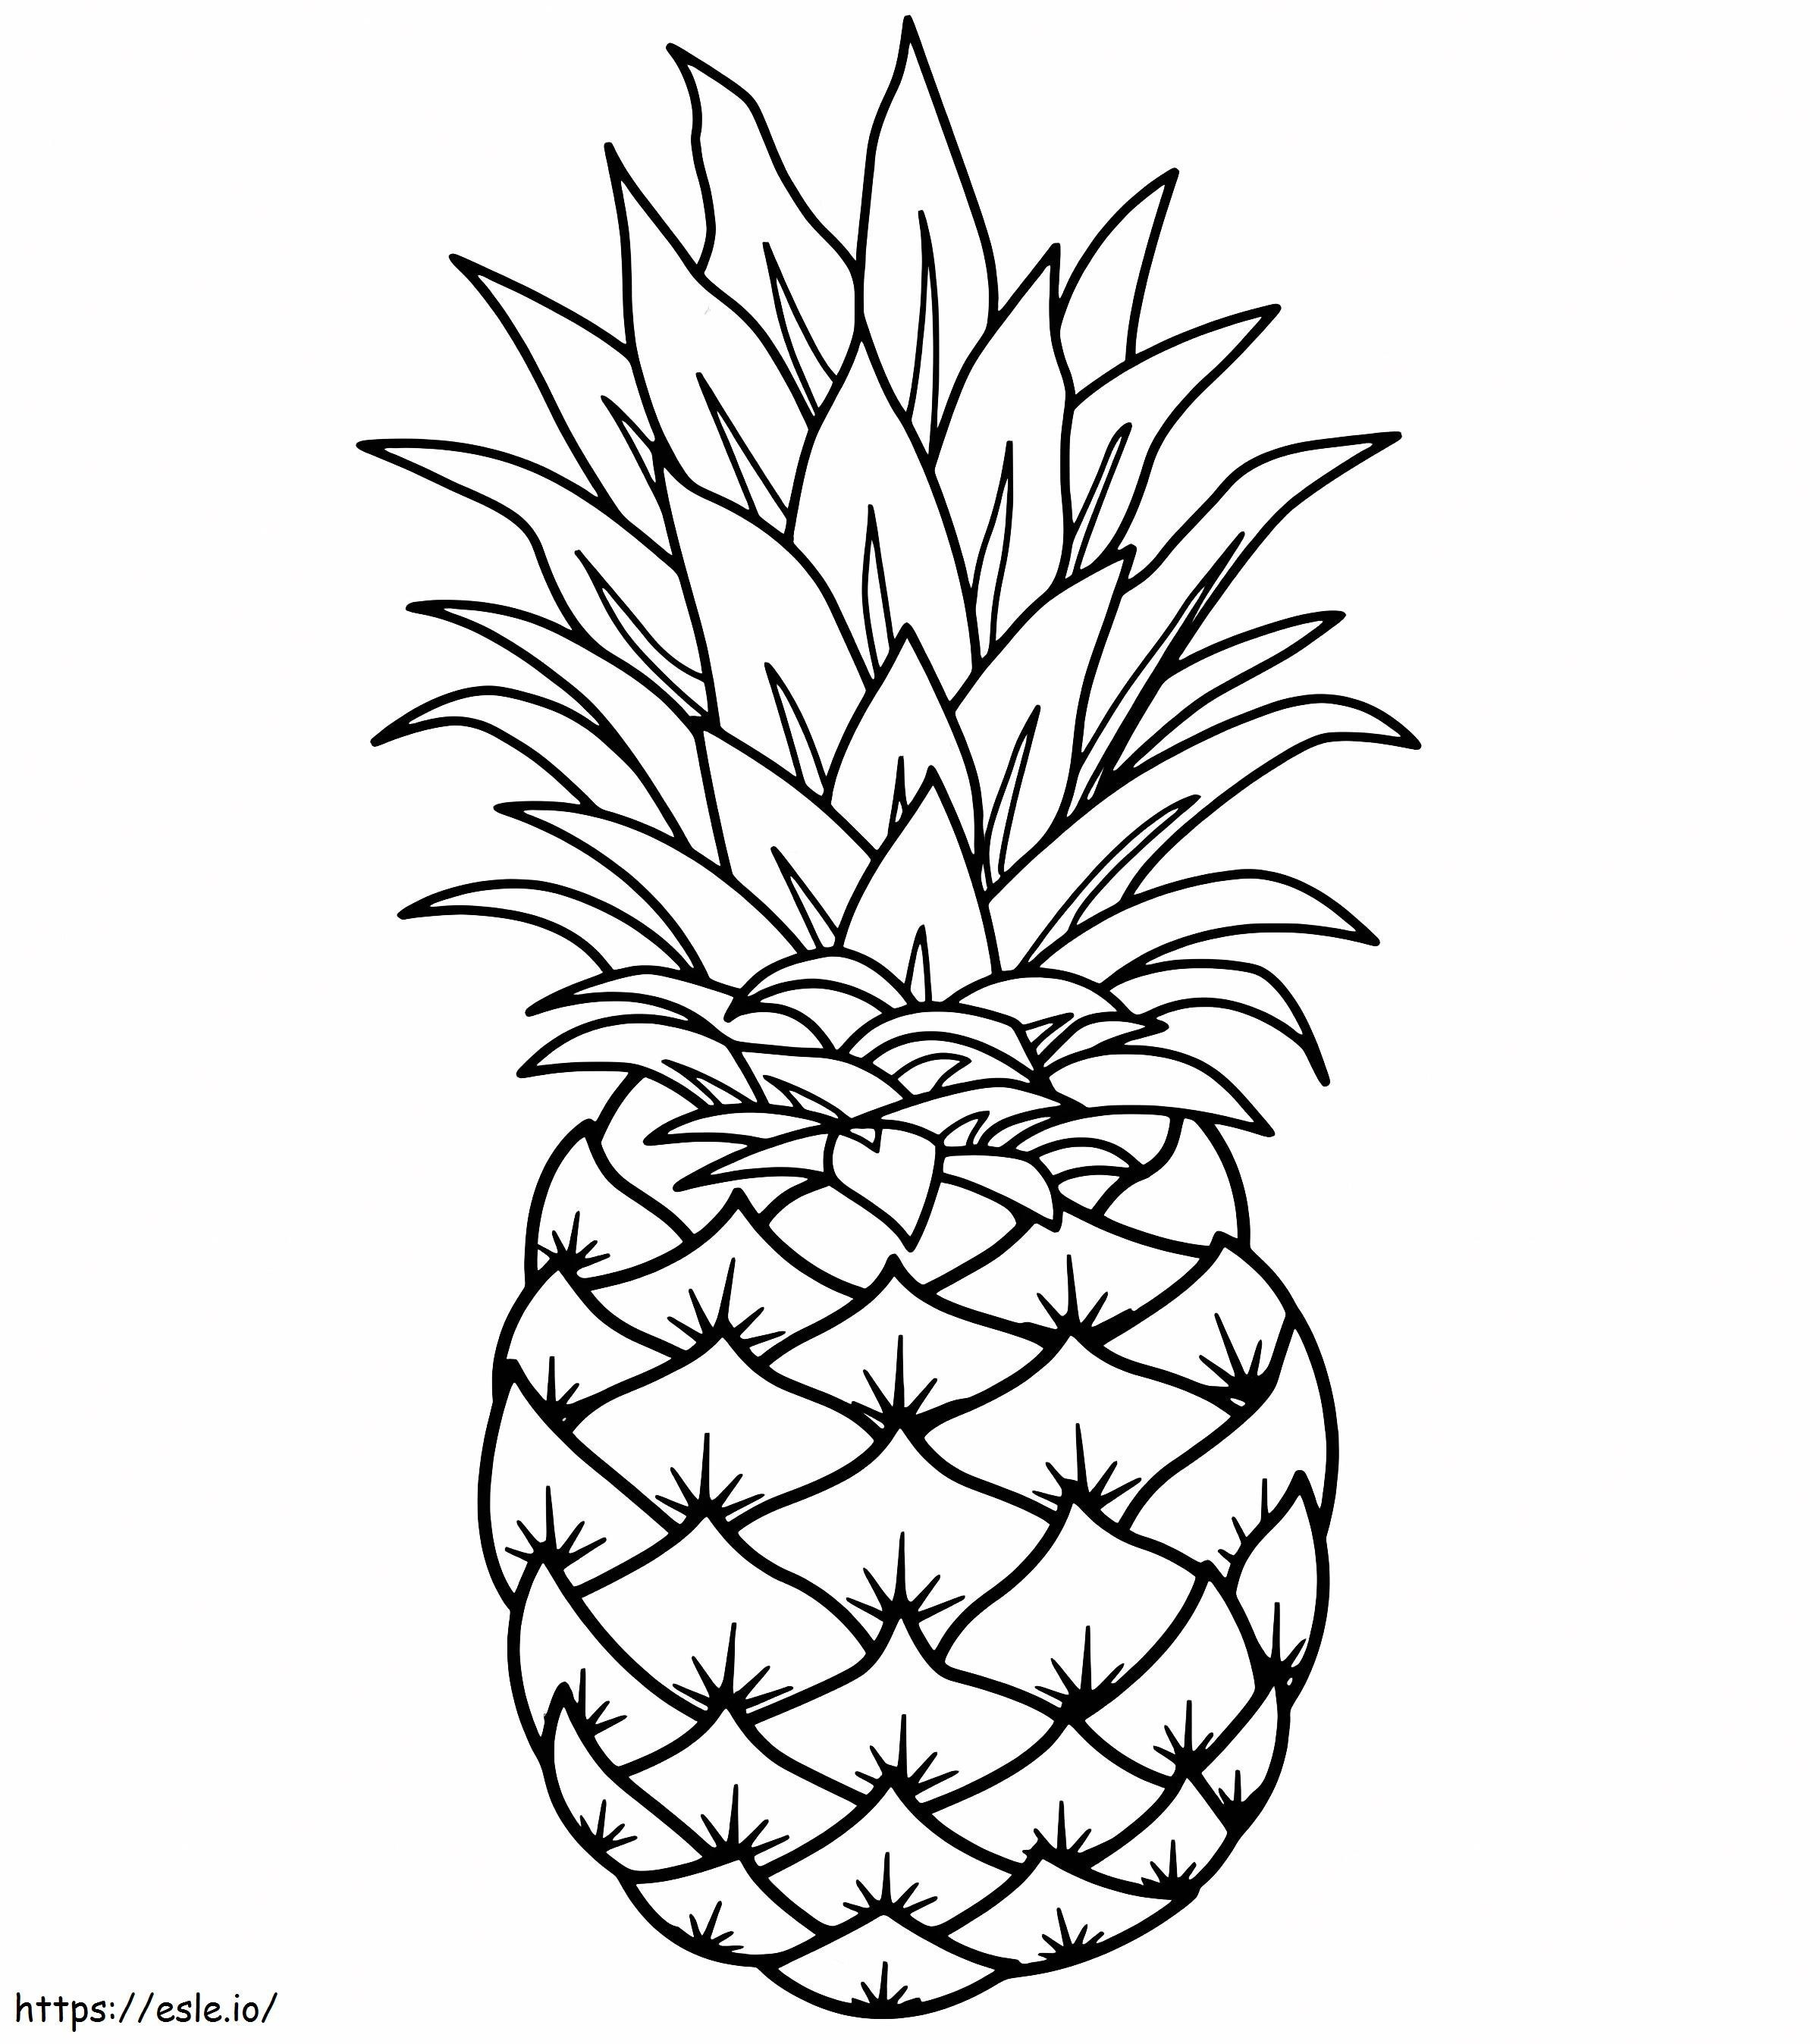 Great Pineapple coloring page